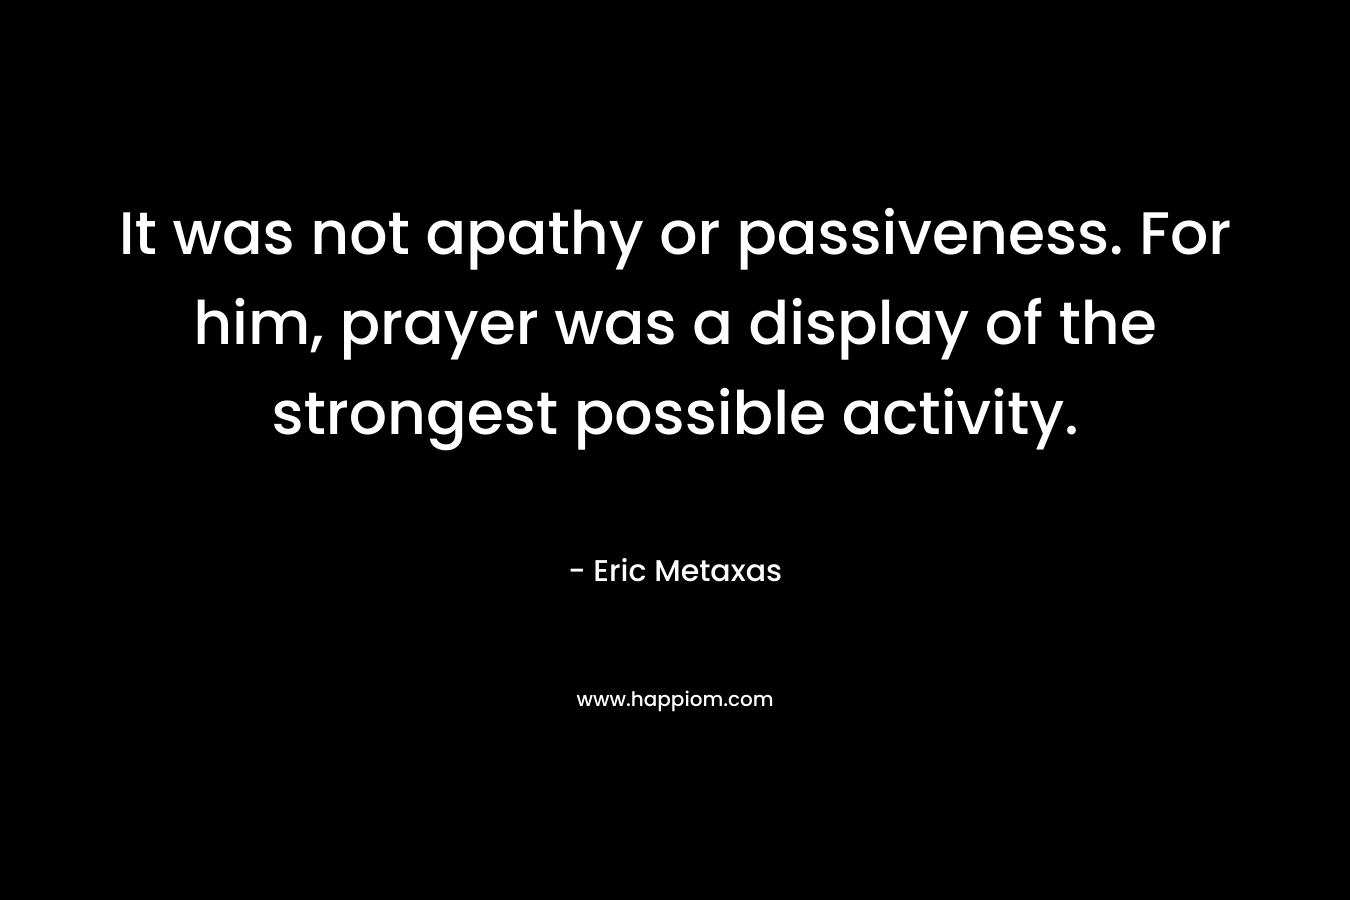 It was not apathy or passiveness. For him, prayer was a display of the strongest possible activity.